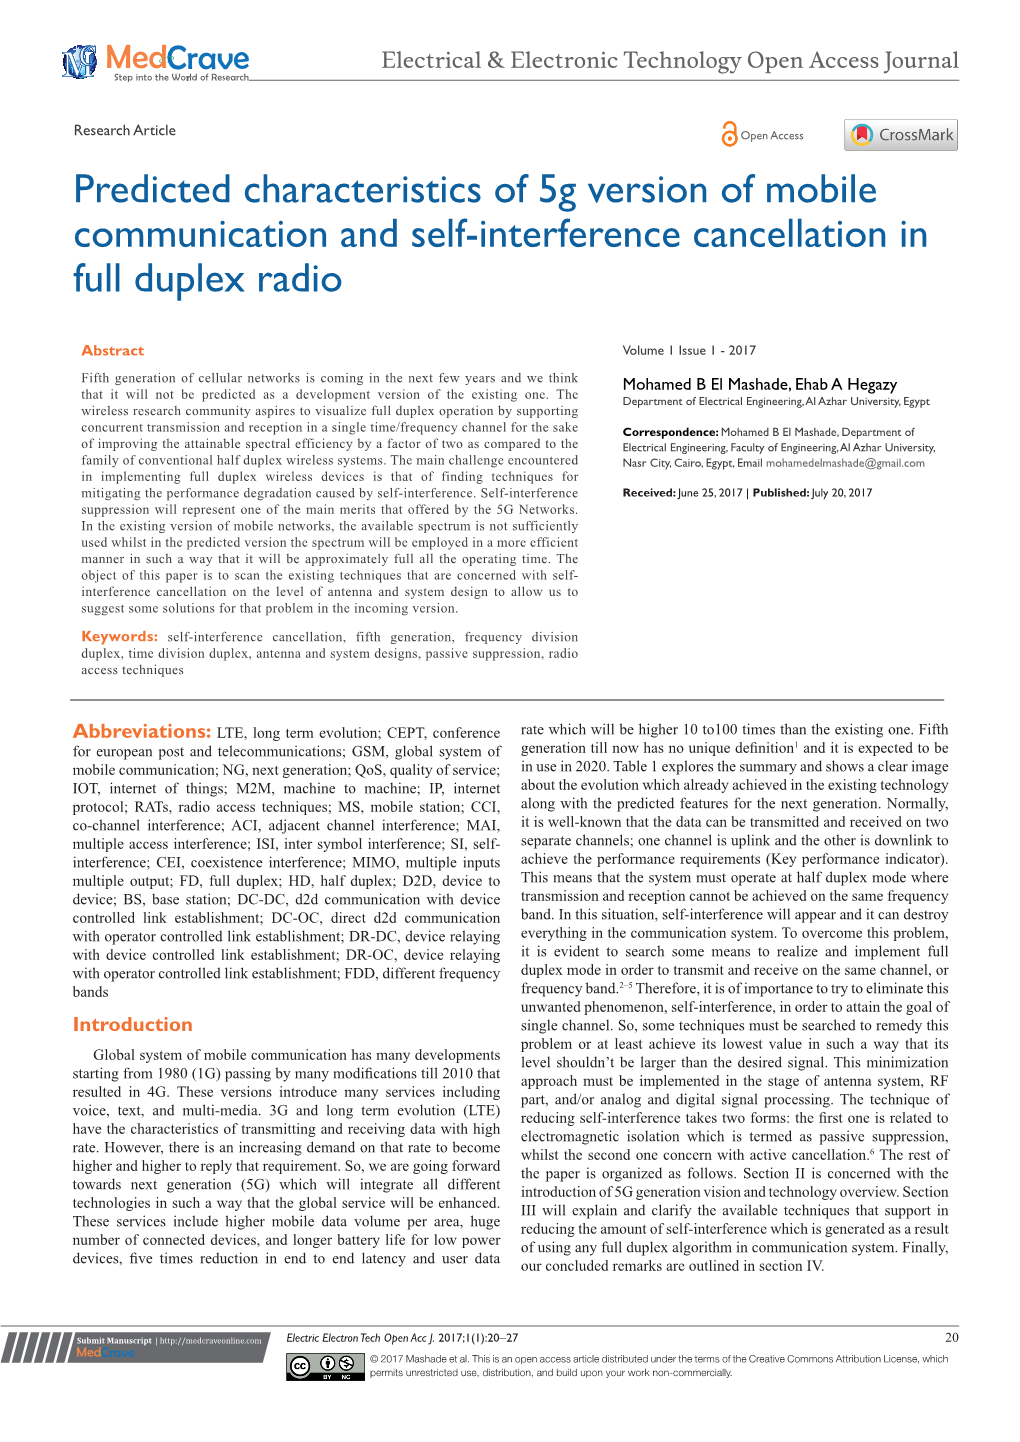 Predicted Characteristics of 5G Version of Mobile Communication and Self-Interference Cancellation in Full Duplex Radio